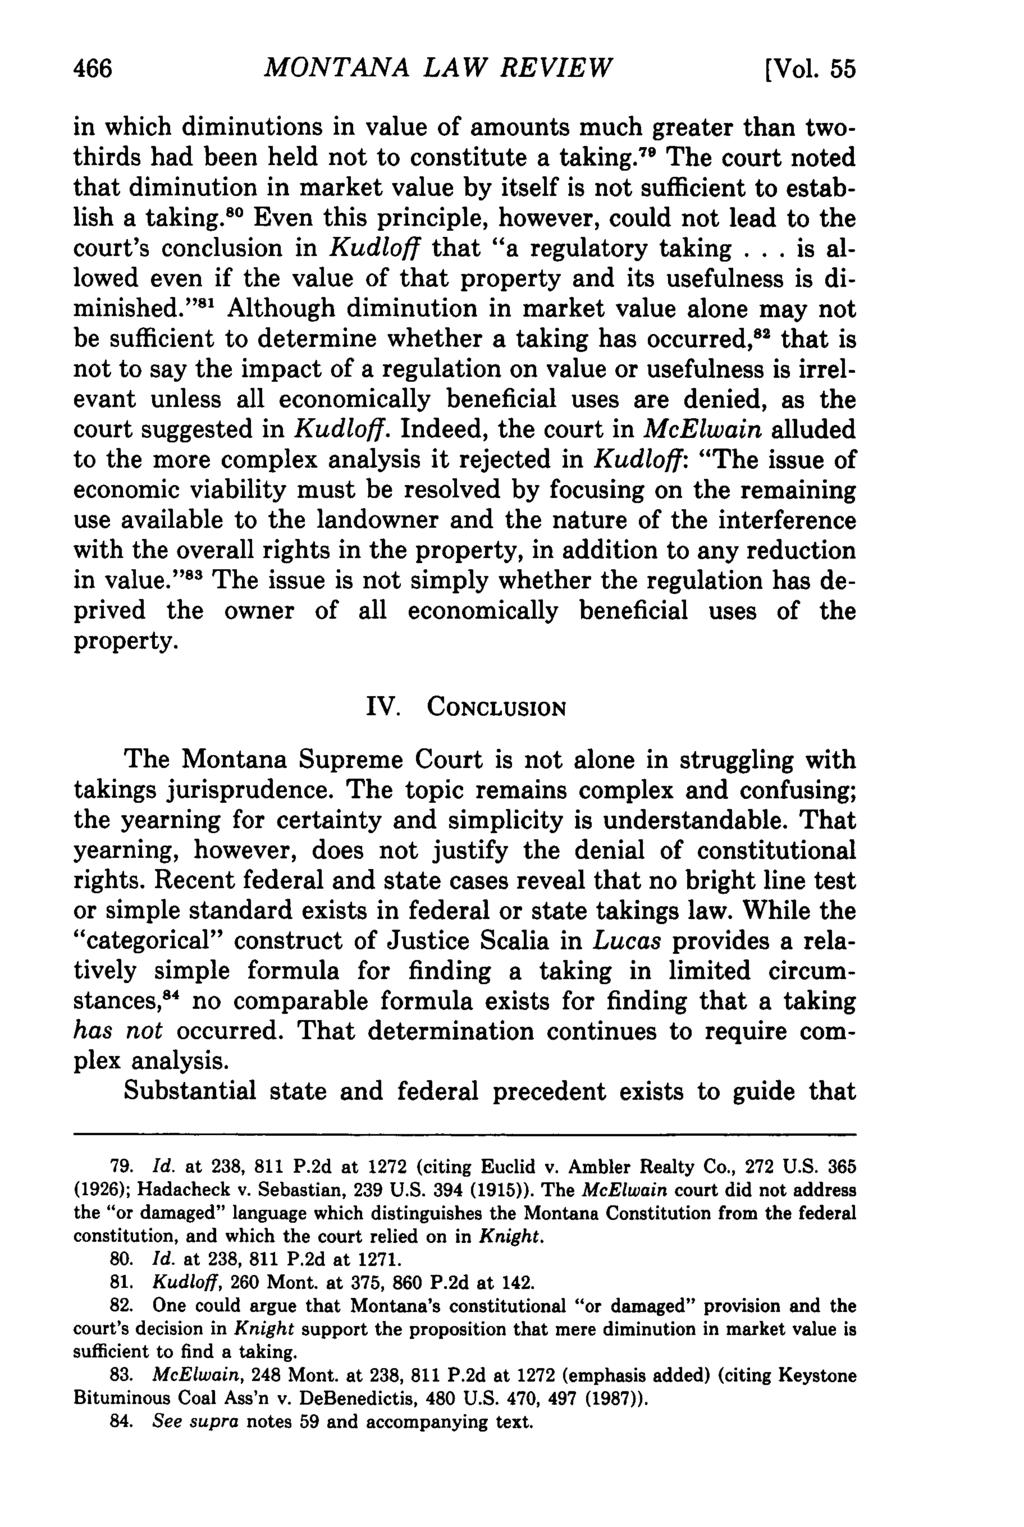 MONTANA Montana Law Review, Vol. 55 [1994], Iss. 2, Art. 10 LAW REVIEW [Vol. 55 in which diminutions in value of amounts much greater than twothirds had been held not to constitute a taking.